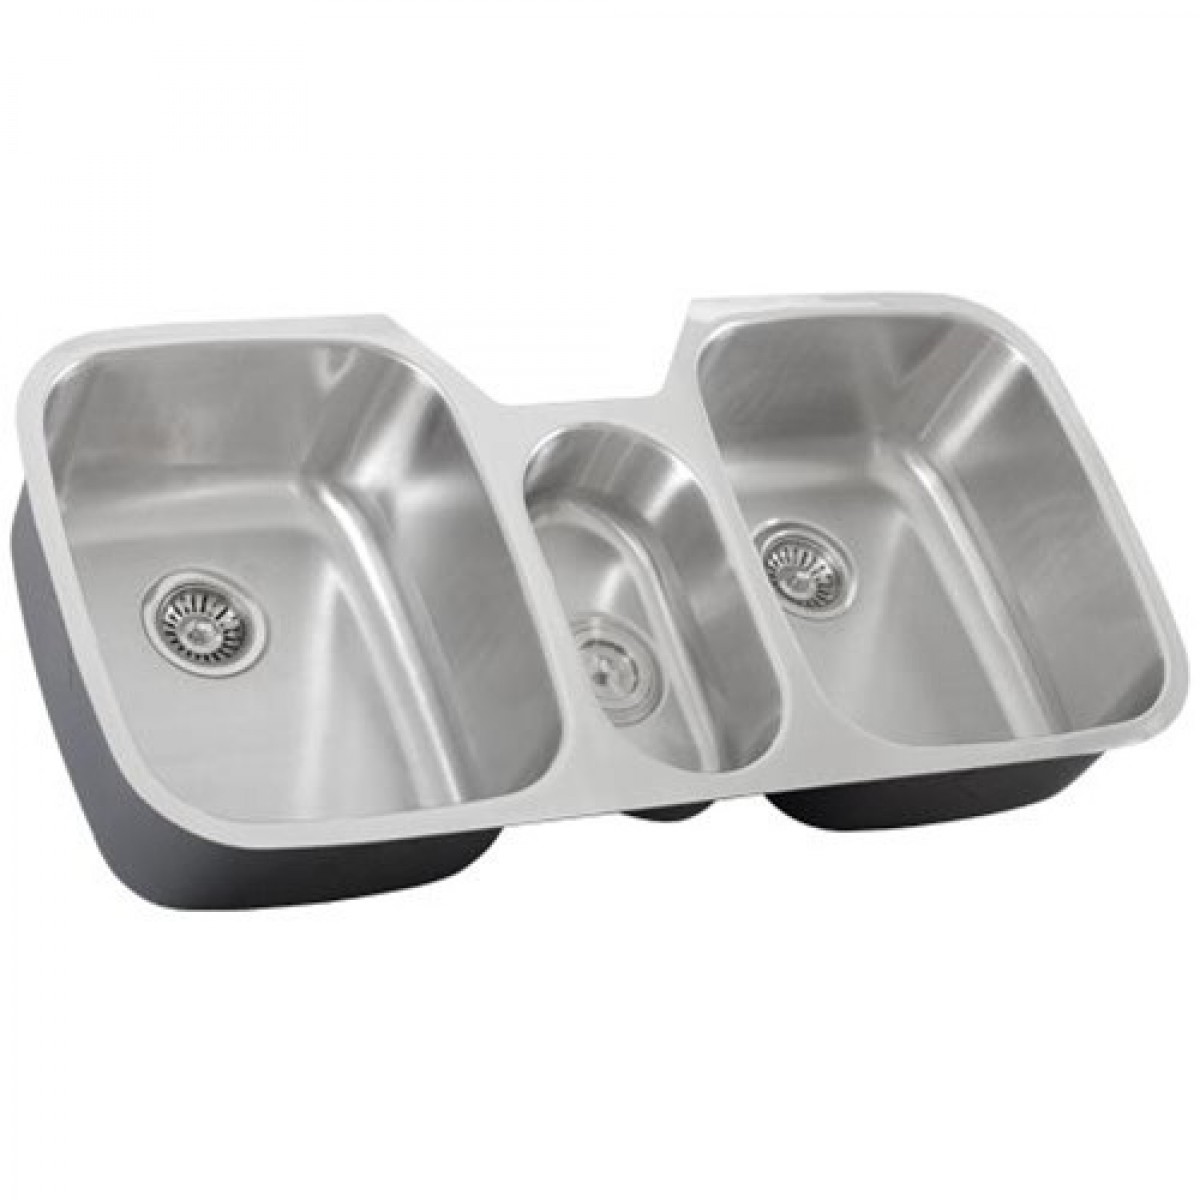 43 Inch Stainless Steel Undermount Triple Bowl Kitchen Sink - 16 Gauge 43 Inch Stainless Steel Sink